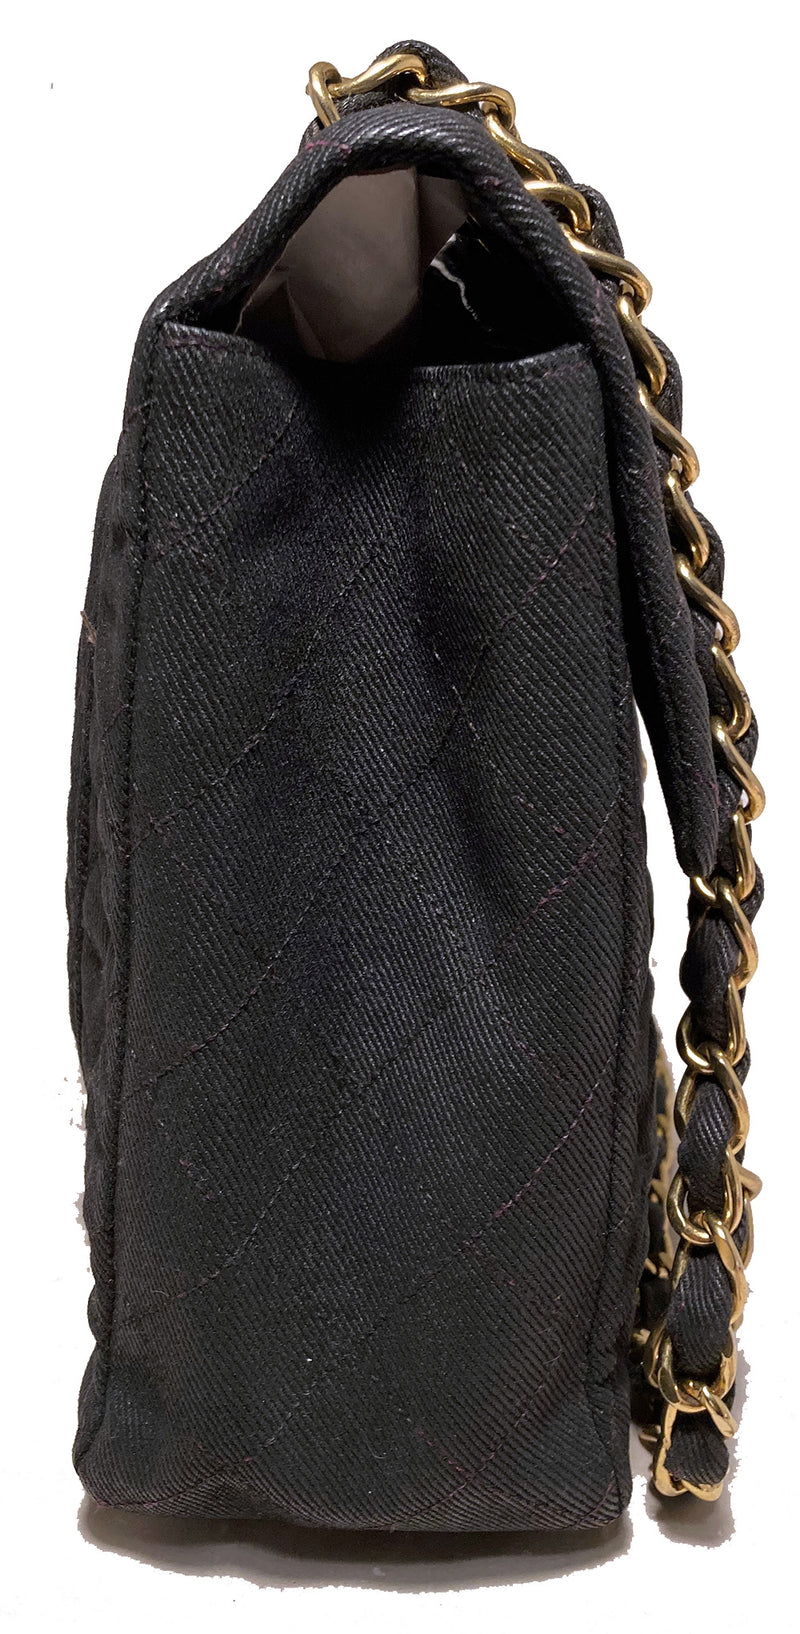 Chanel Black Quilted Canvas Clutch with Chain and Foldable Tote Bag Silver Hardware (Very Good)